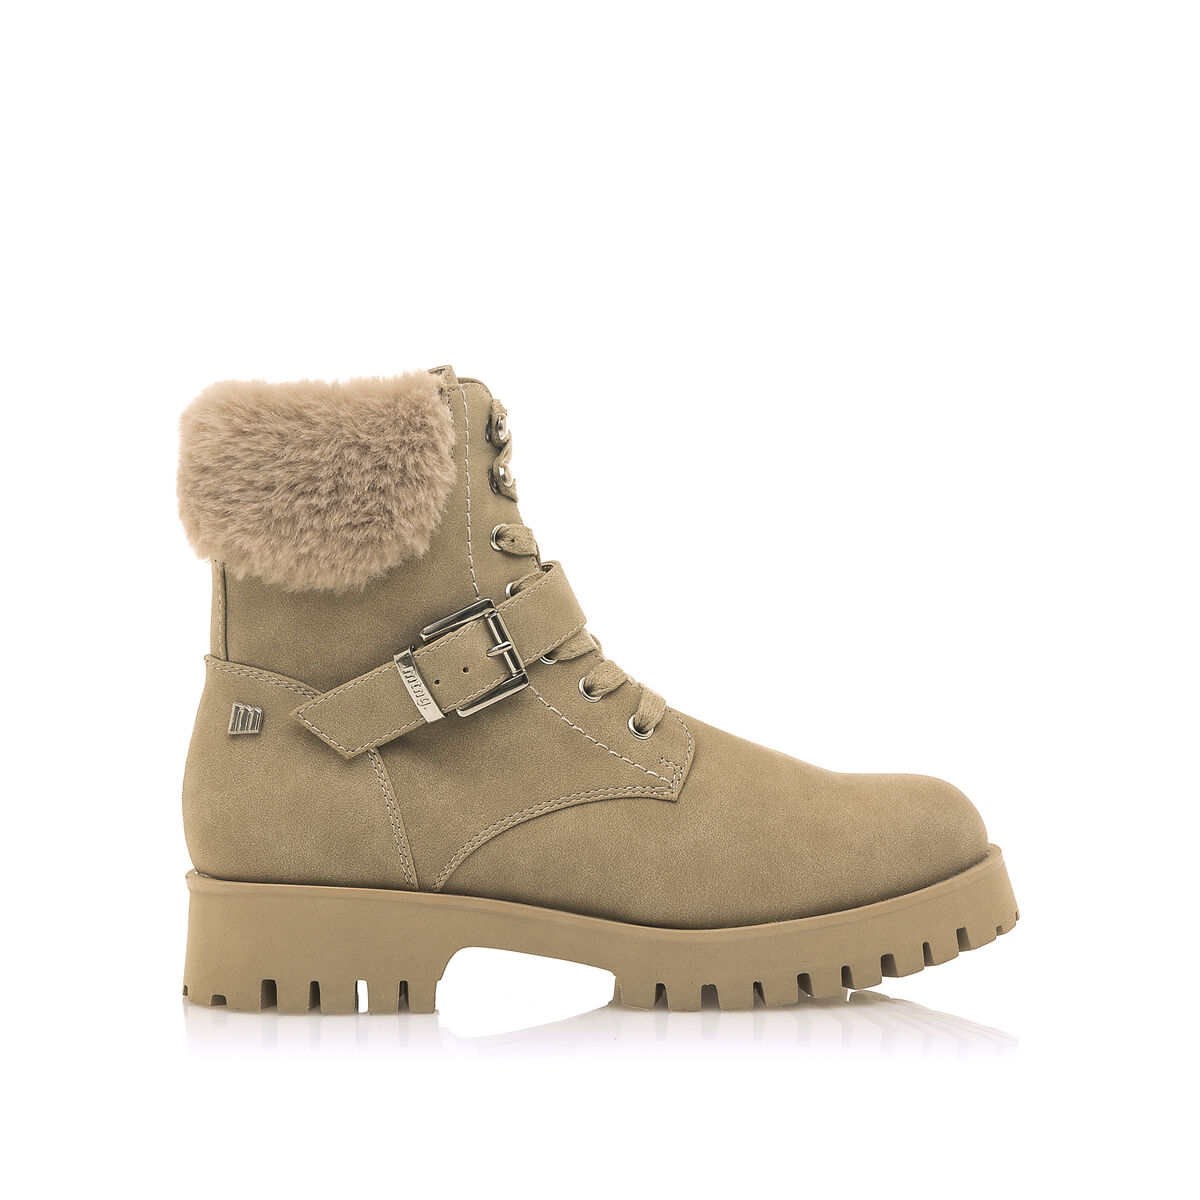 MTNG BEIGE MILITARY ANKLE BOOTS